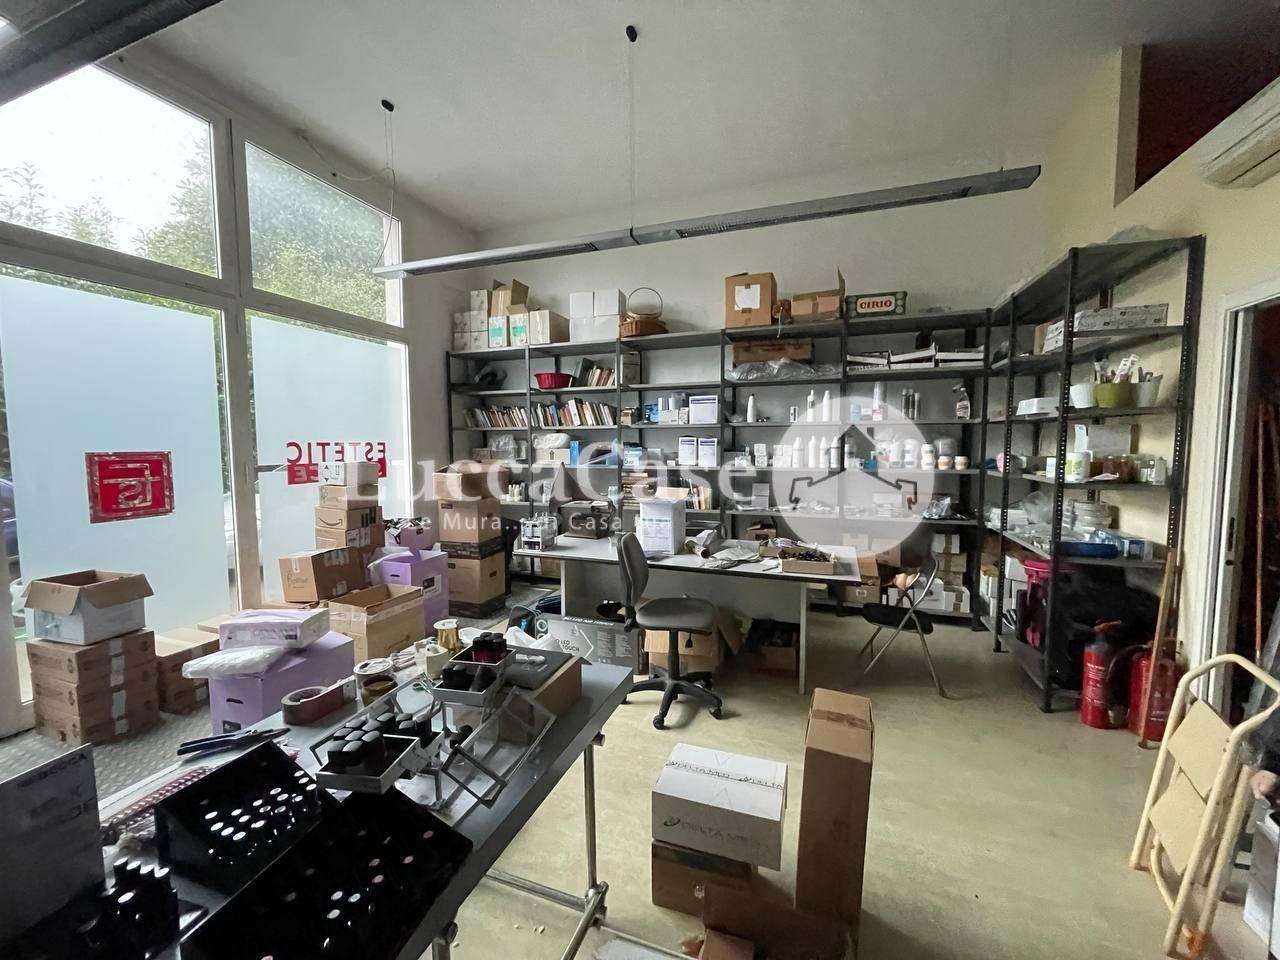 Workshop for sale in Lucca